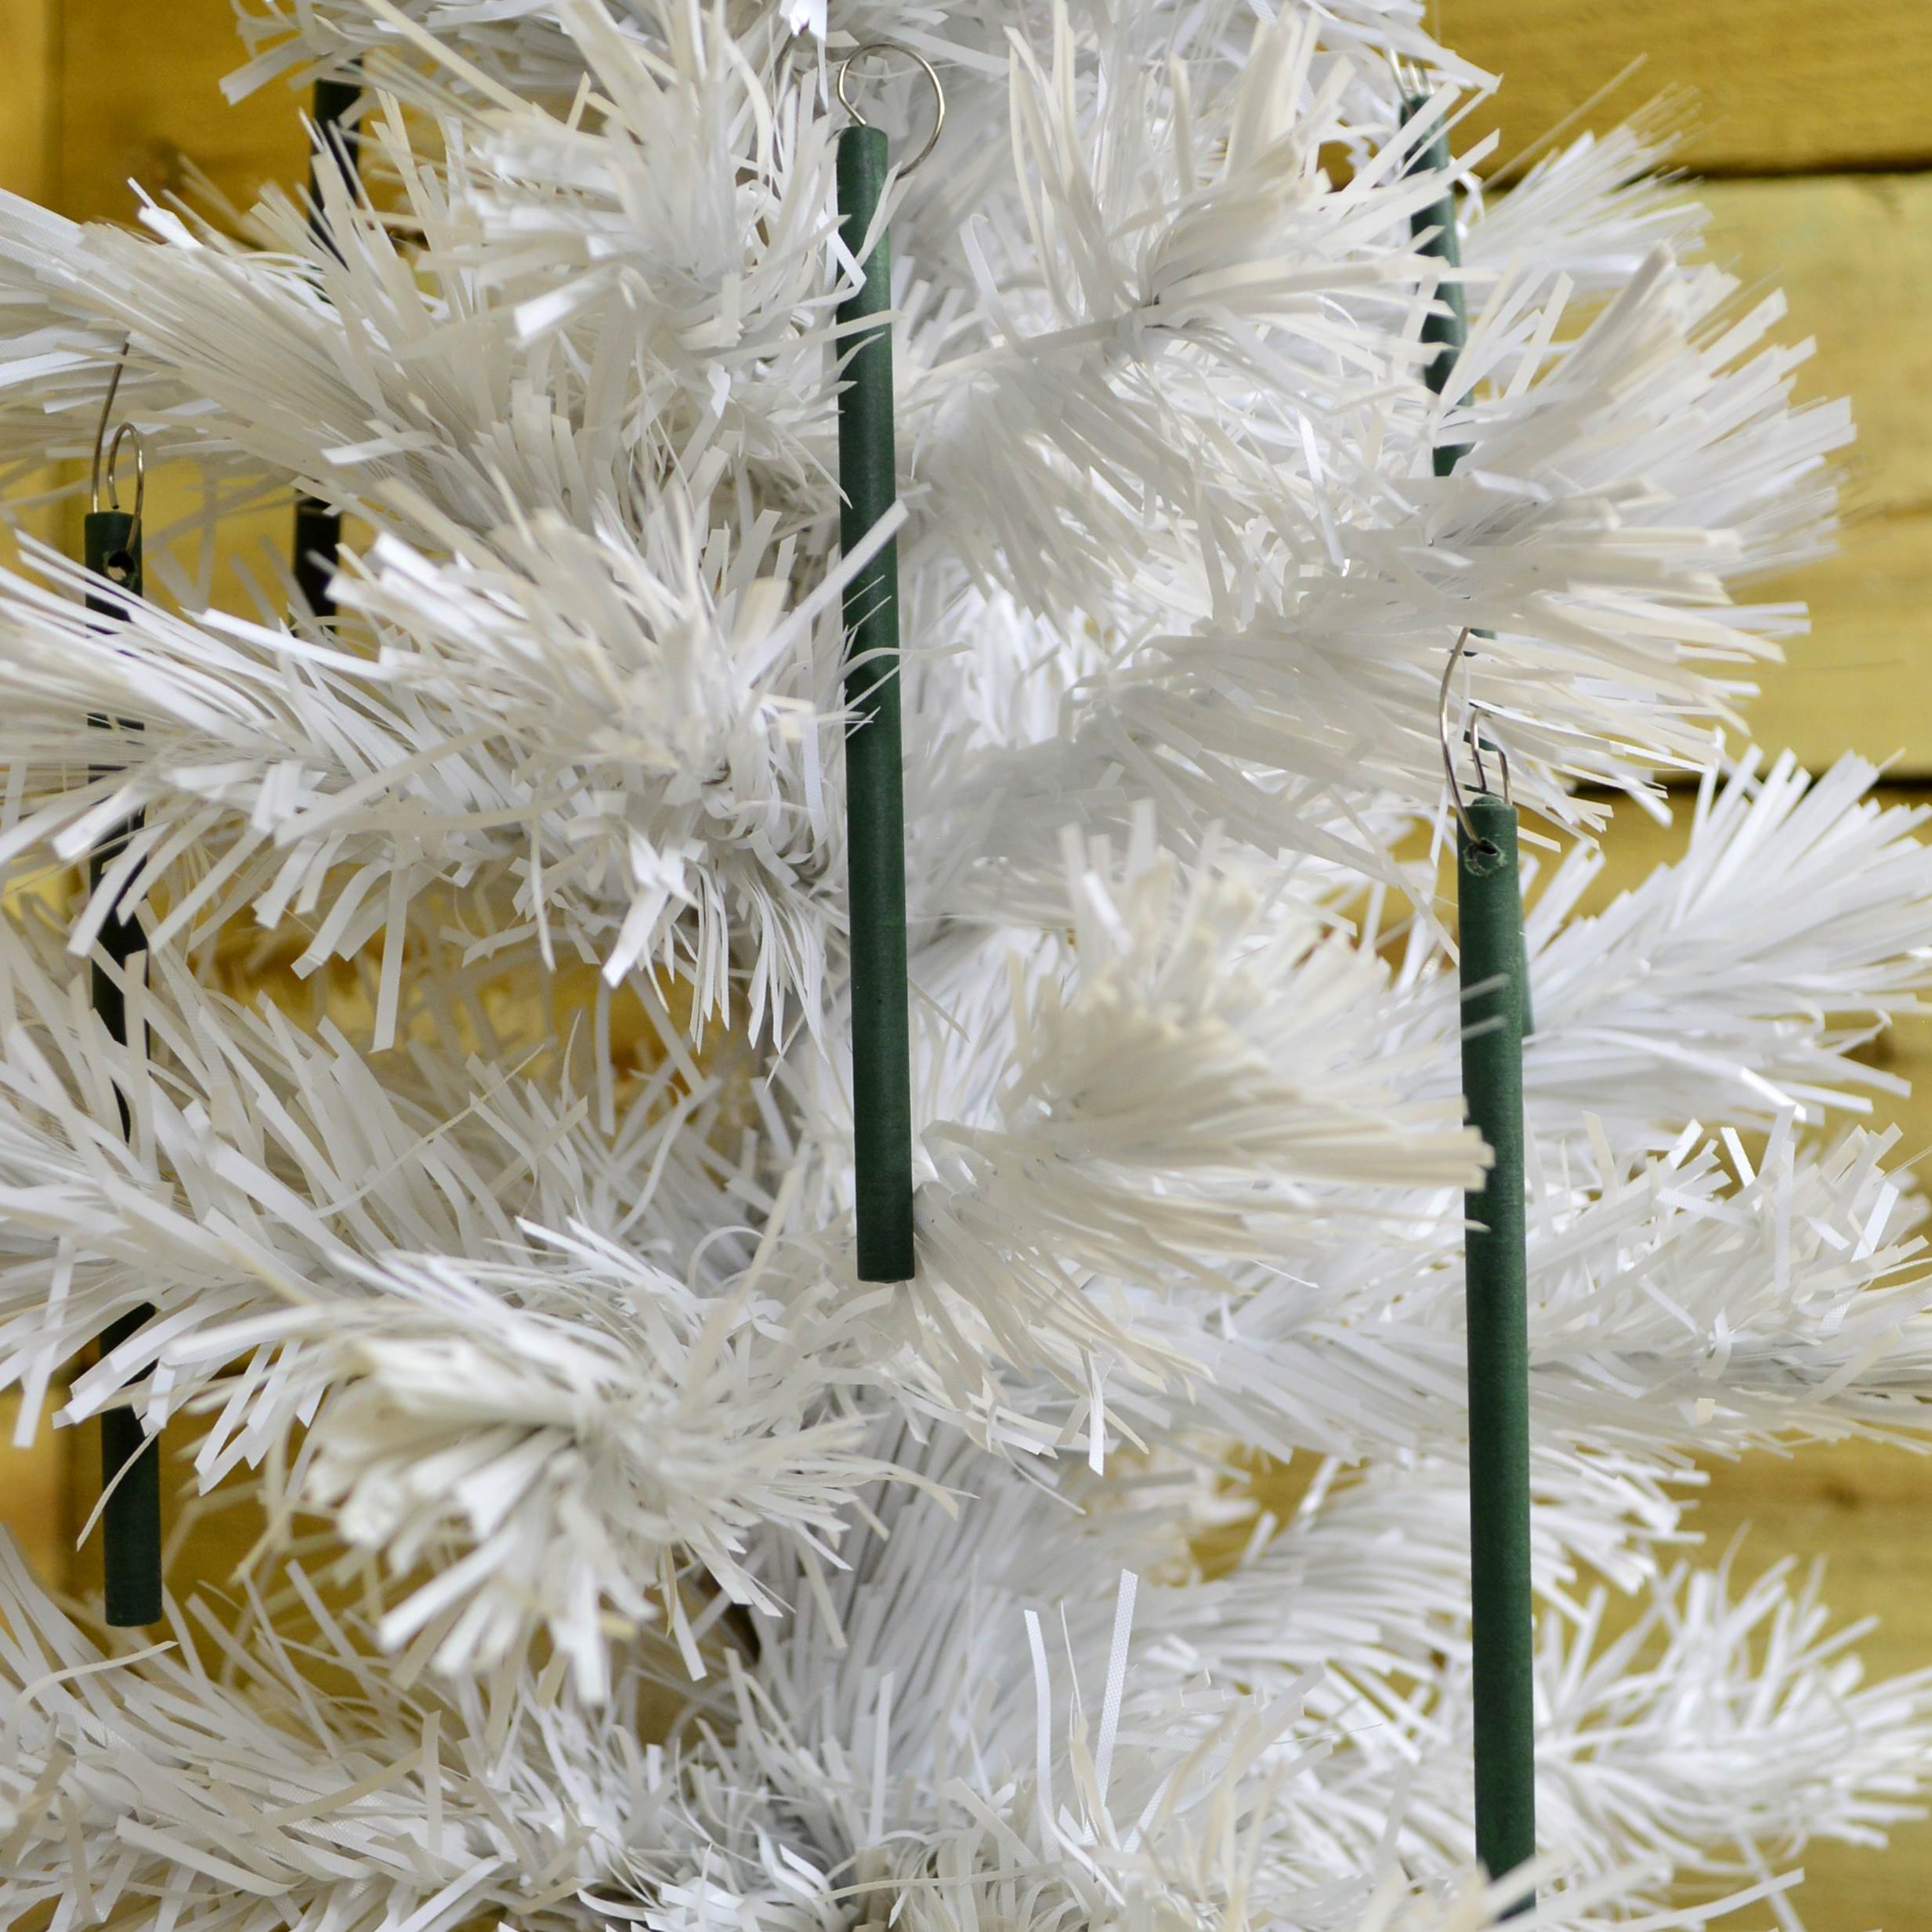 6 Scentsicles Scented Hanging Ornaments Sticks - Two Dashes of Cinnamon